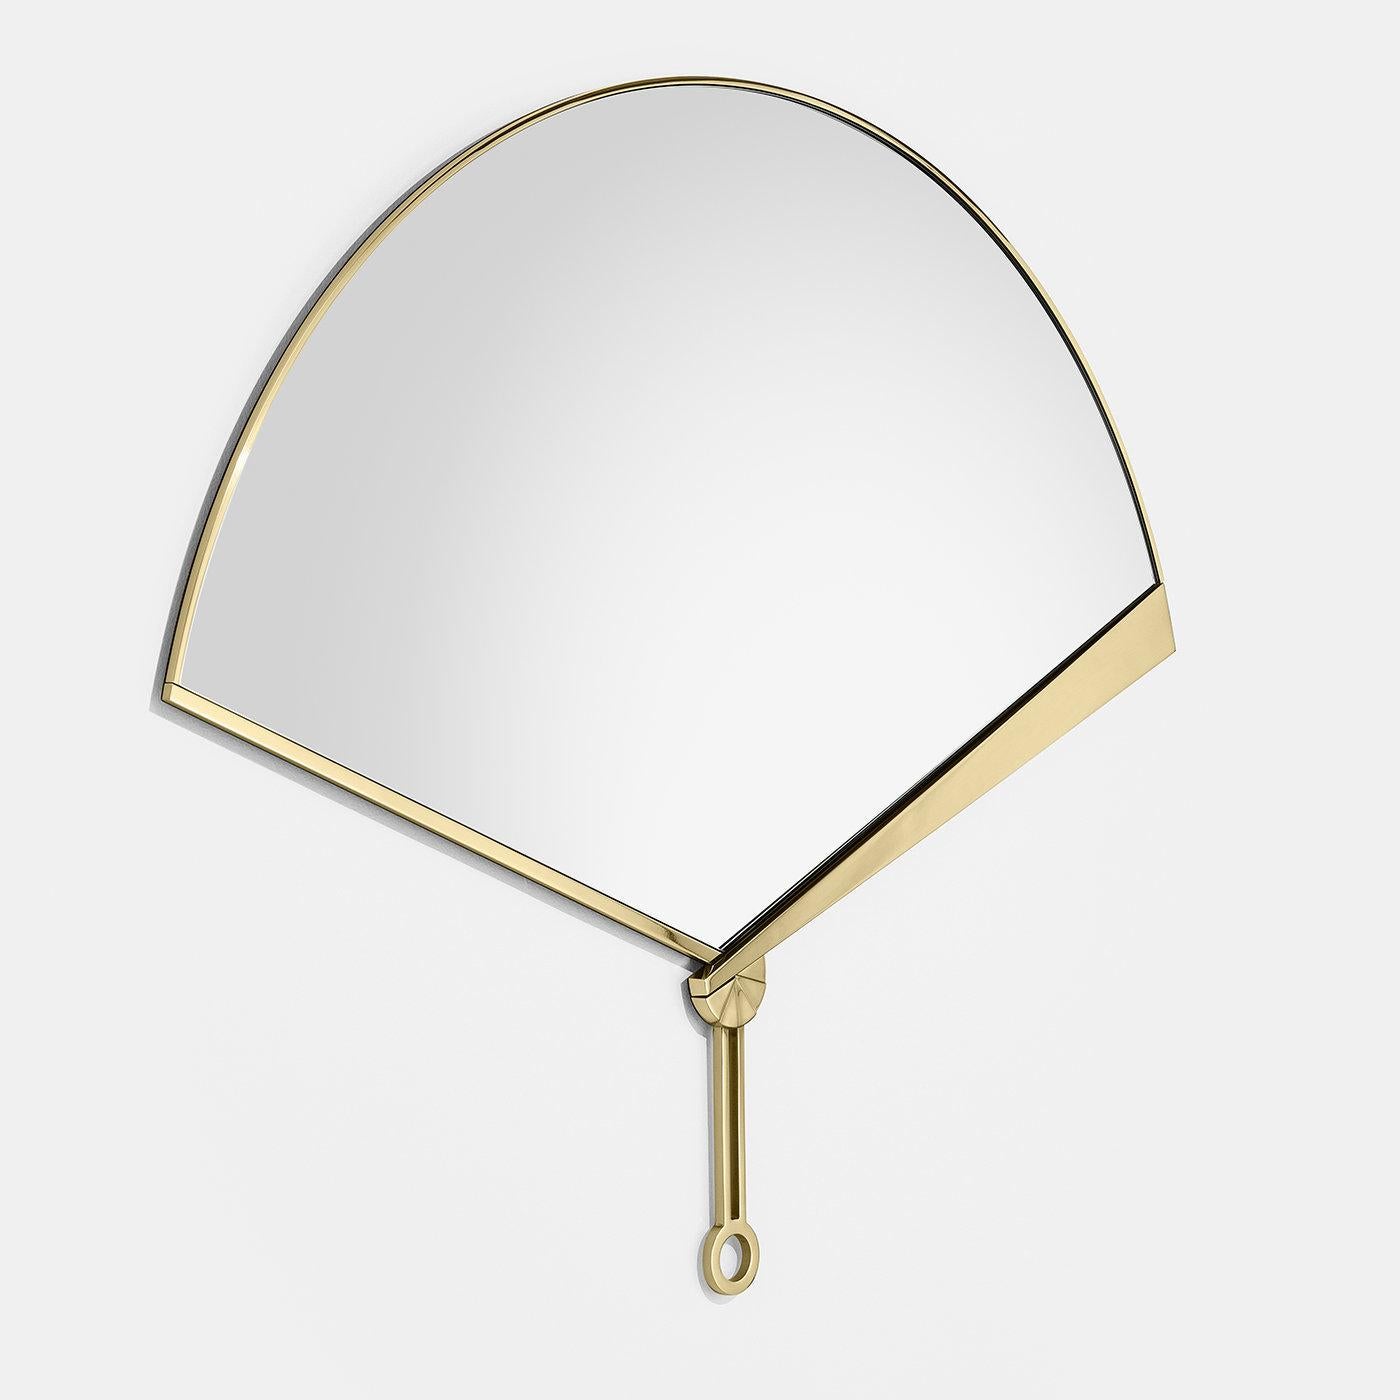 Hand-Crafted Fan Mirror by Studio ITO For Sale